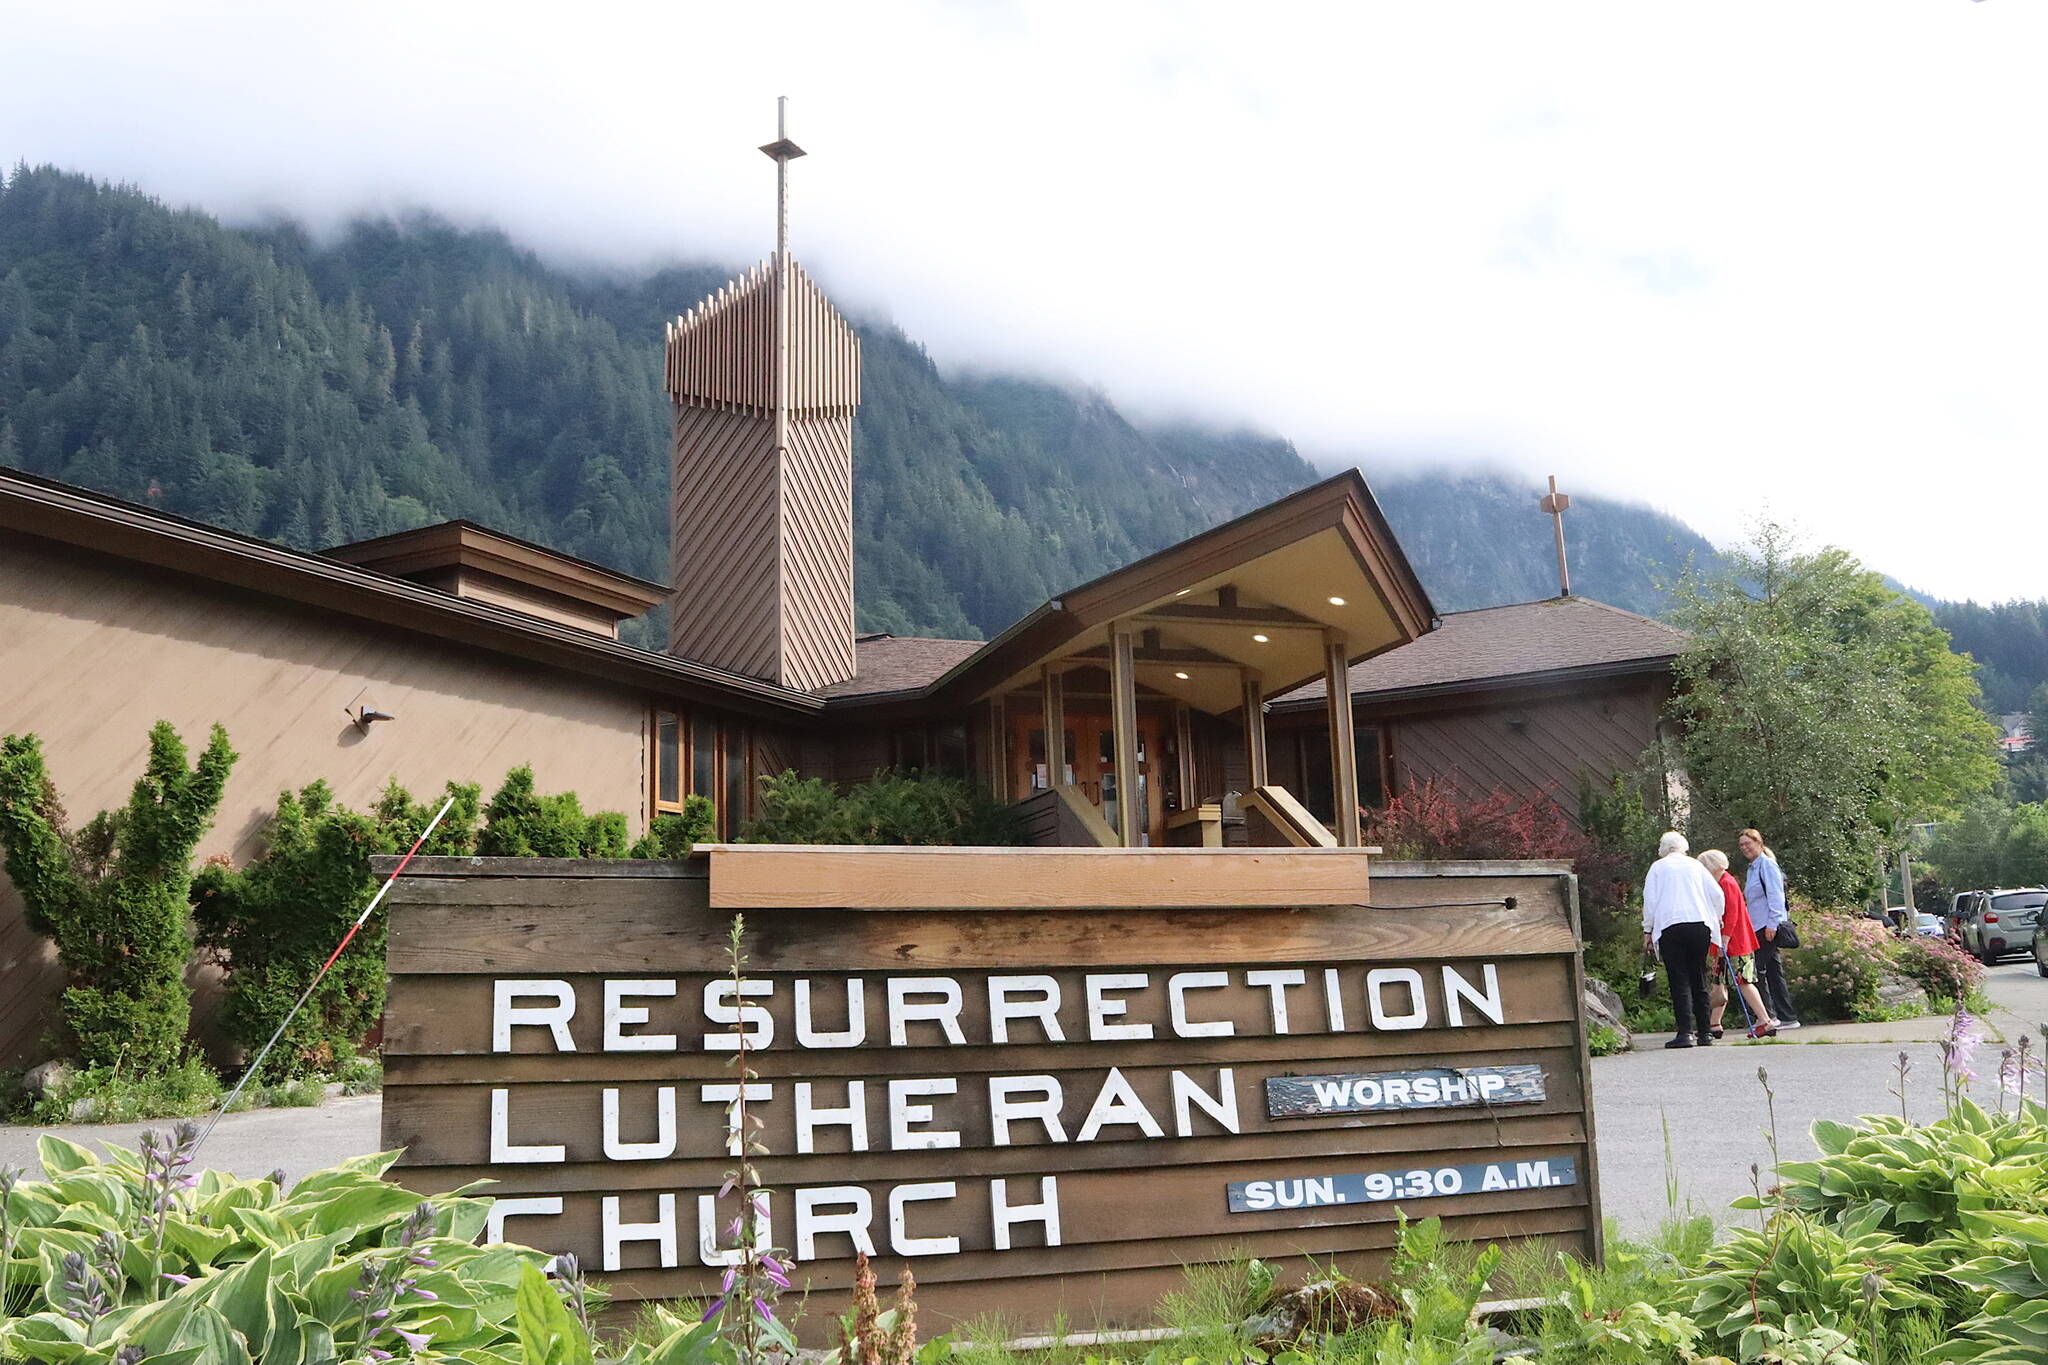 People arrive for a service at Resurrection Lutheran Church on Sunday. (Mark Sabbatini / Juneau Empire)